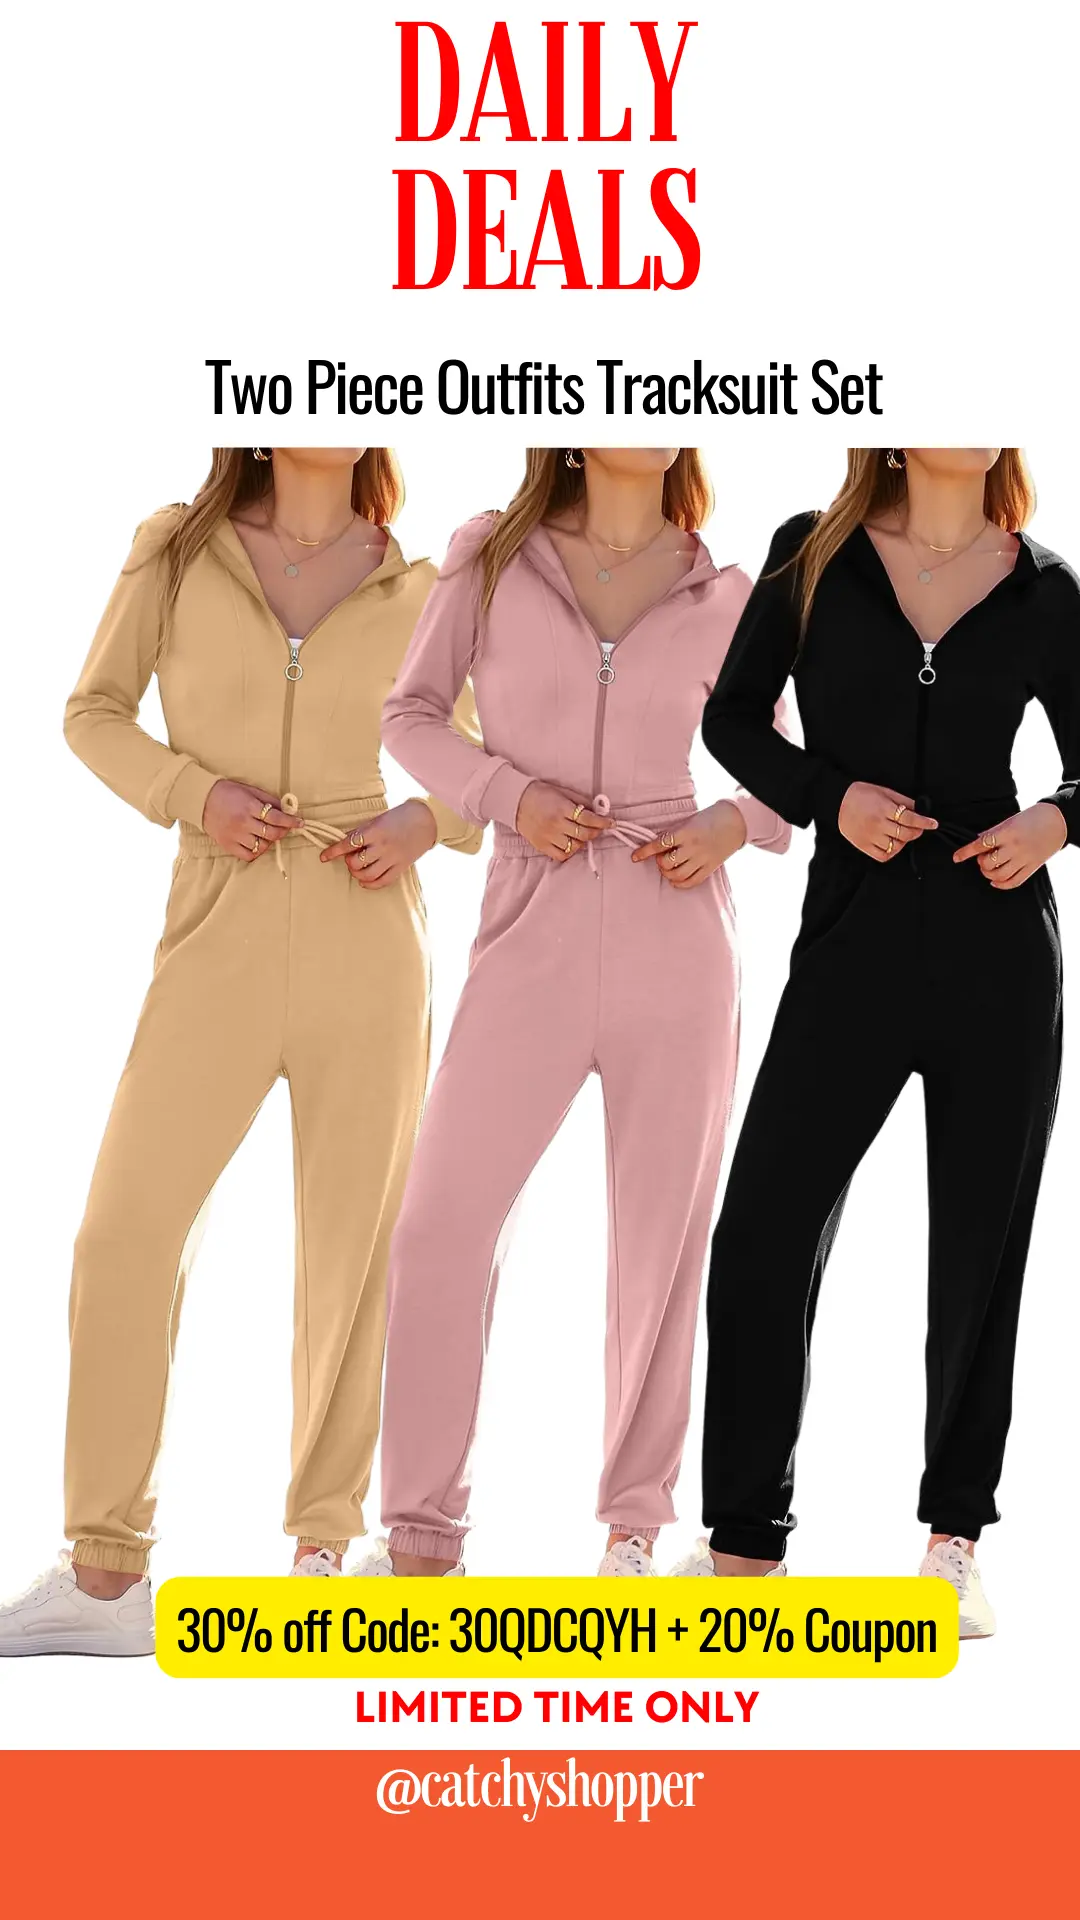 Two Piece Outfits Tracksuit Set